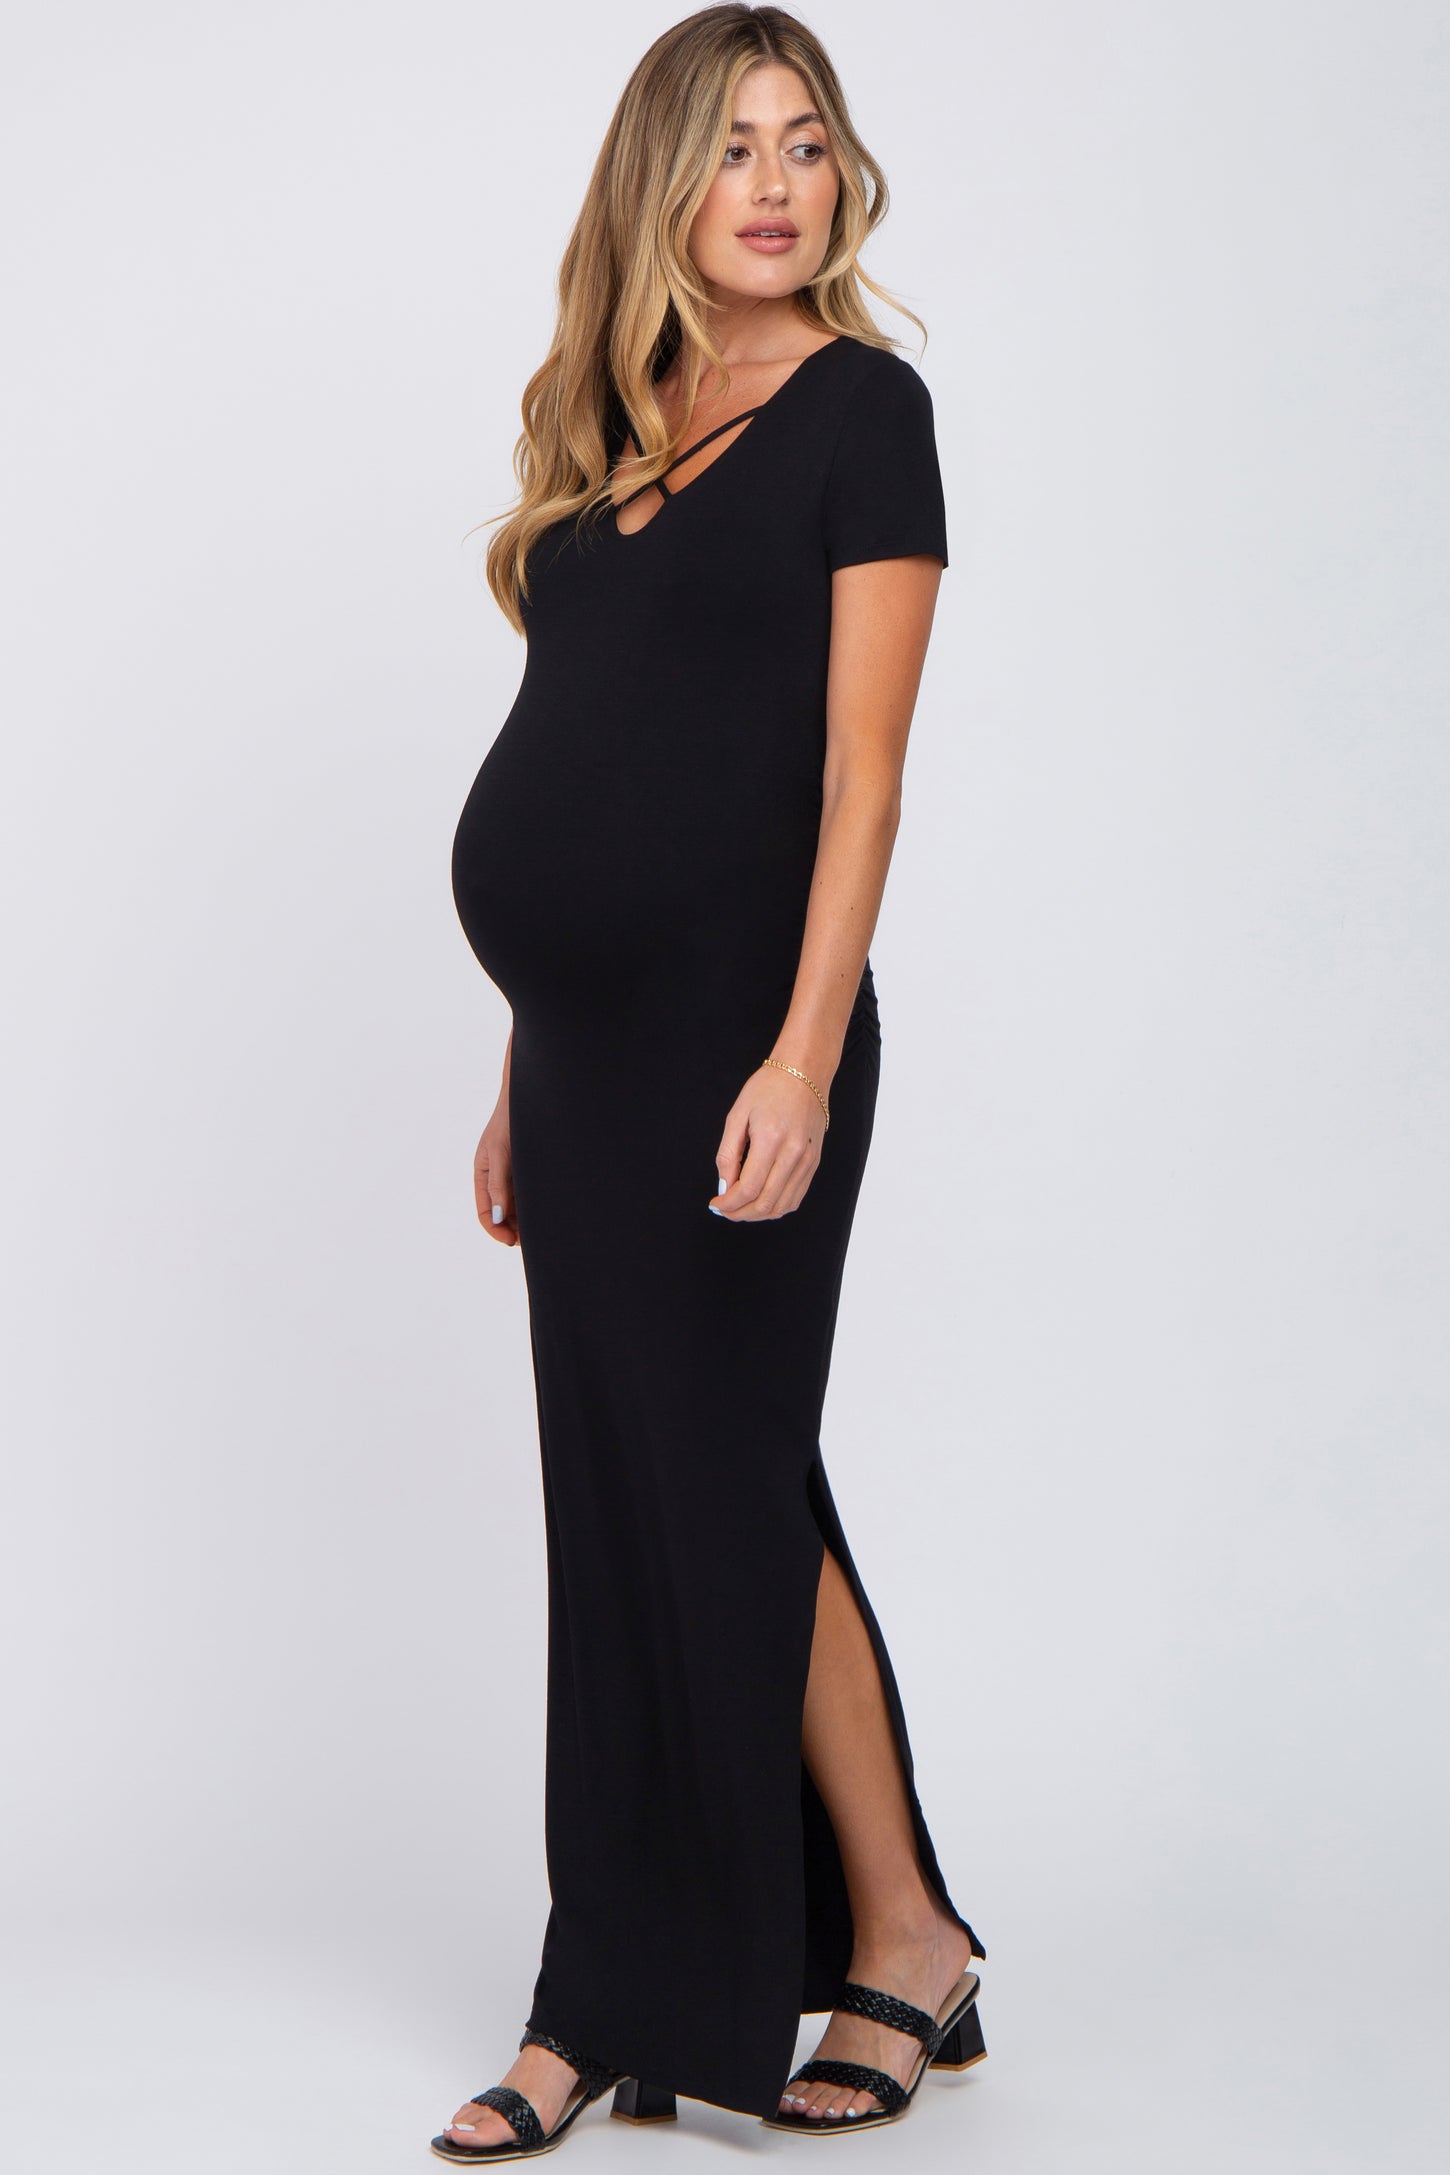 Black Cross Front Ruched Maternity Maxi Dress